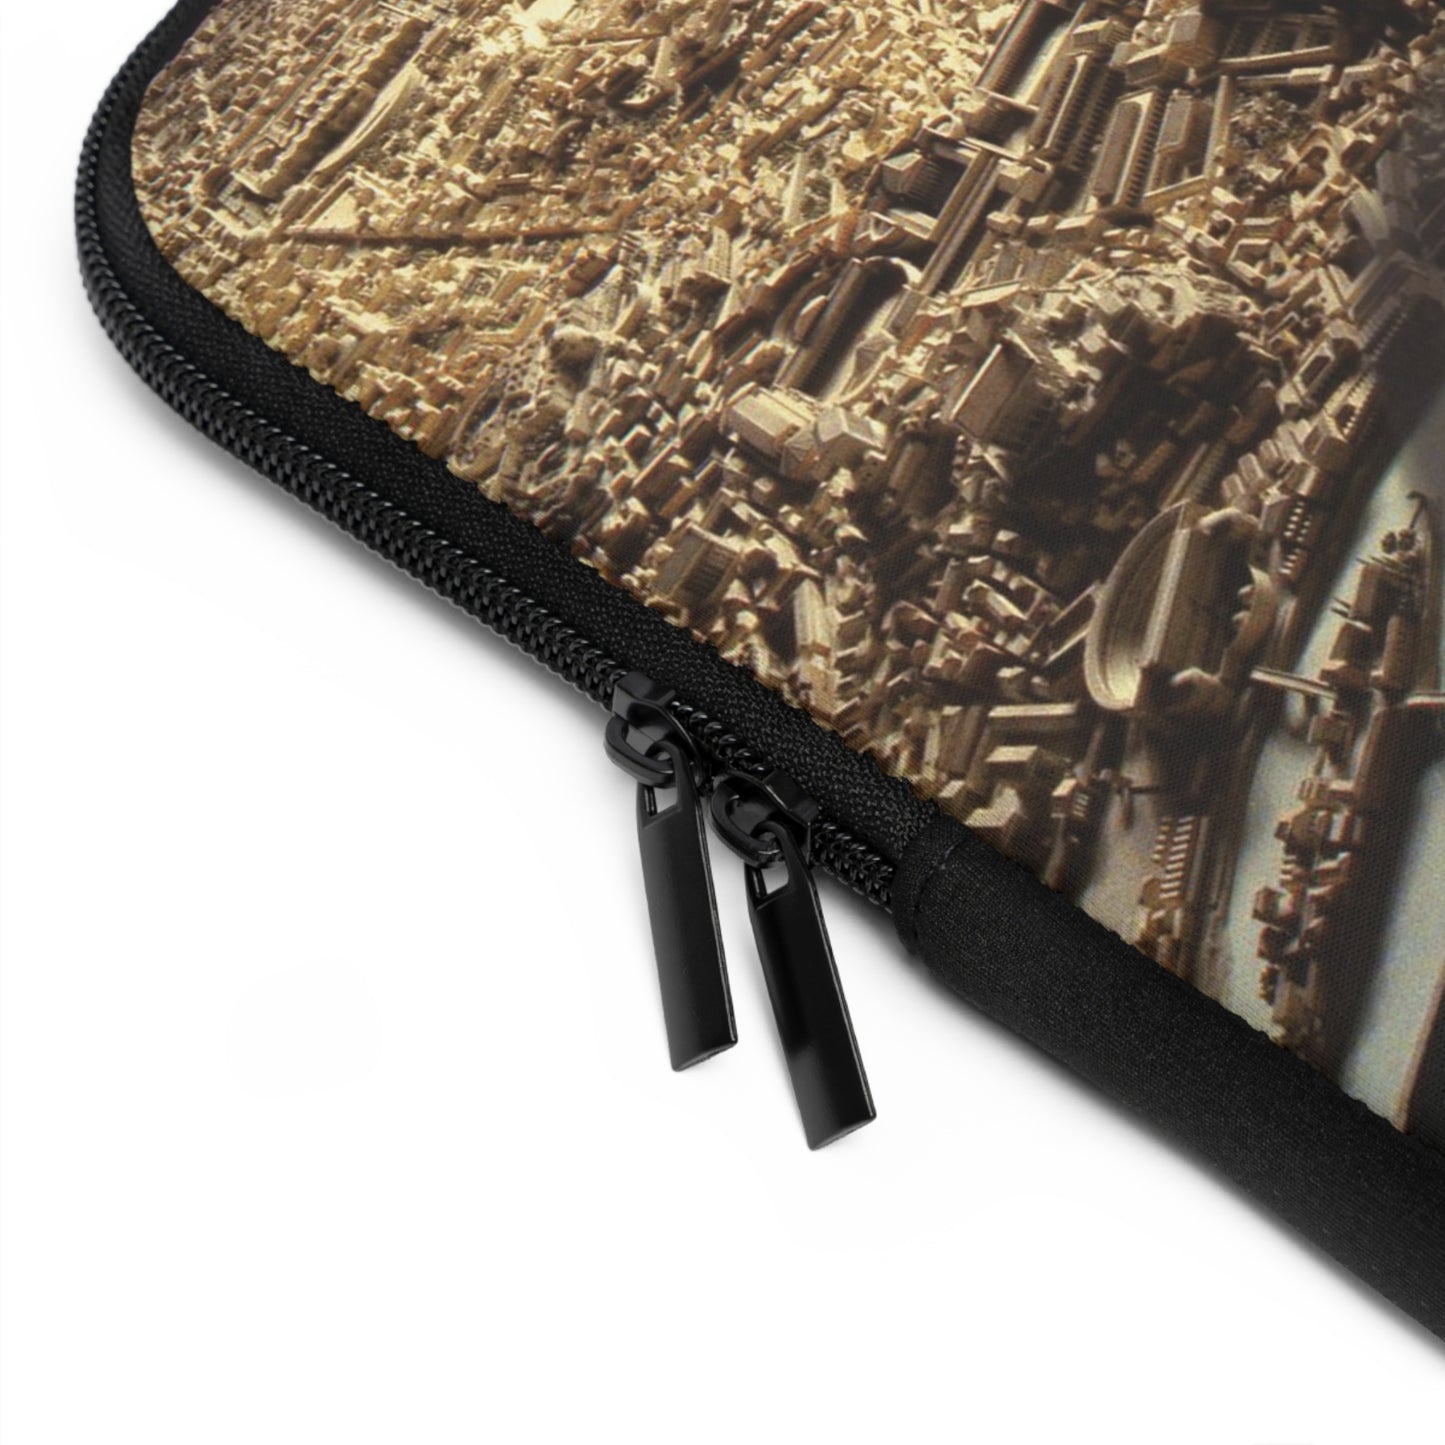 The Muse Of Rome Laptop Sleeve